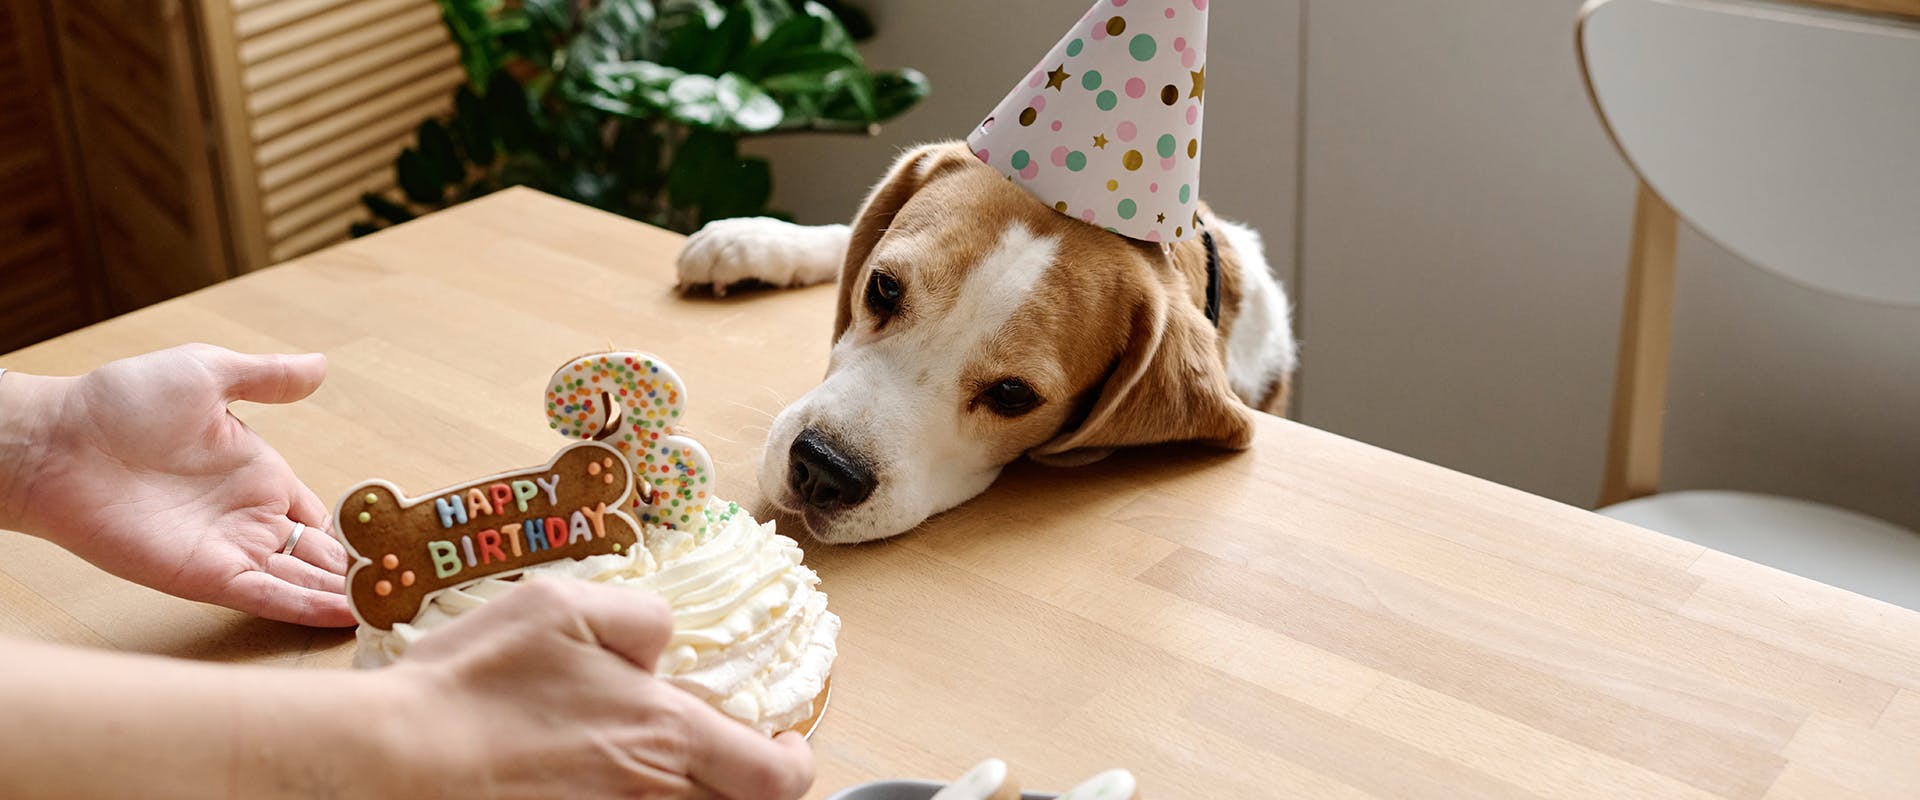 A Beagle dog wearing a part hat, being presented with a dog-friendly 'happy birthday' cake